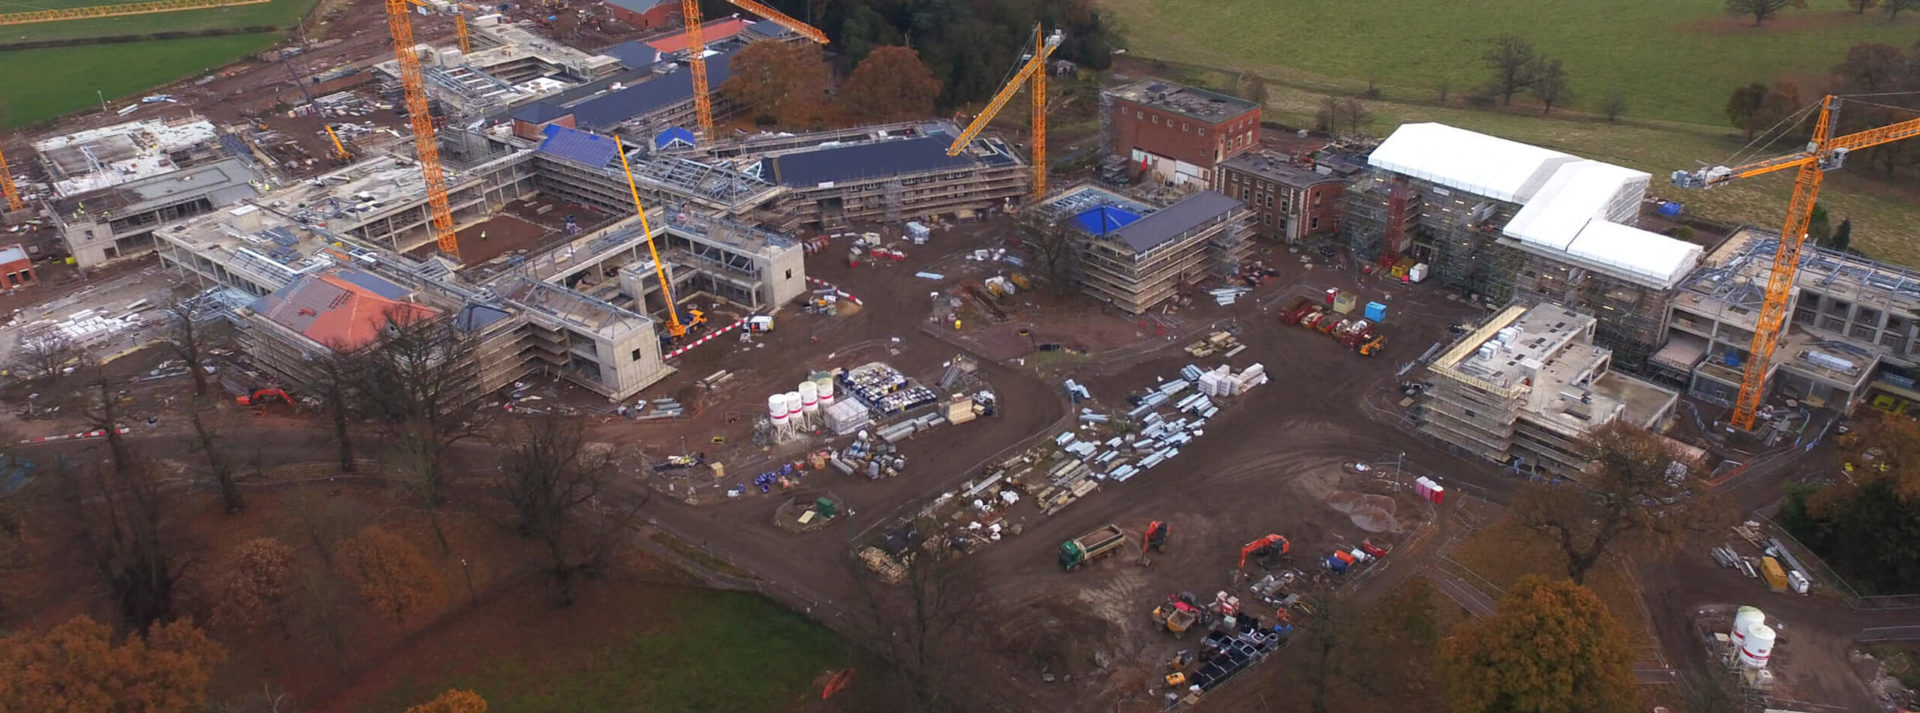 Here is the latest update from Interserve's Project Director, Mark Green, on the progress being made at DNRC.